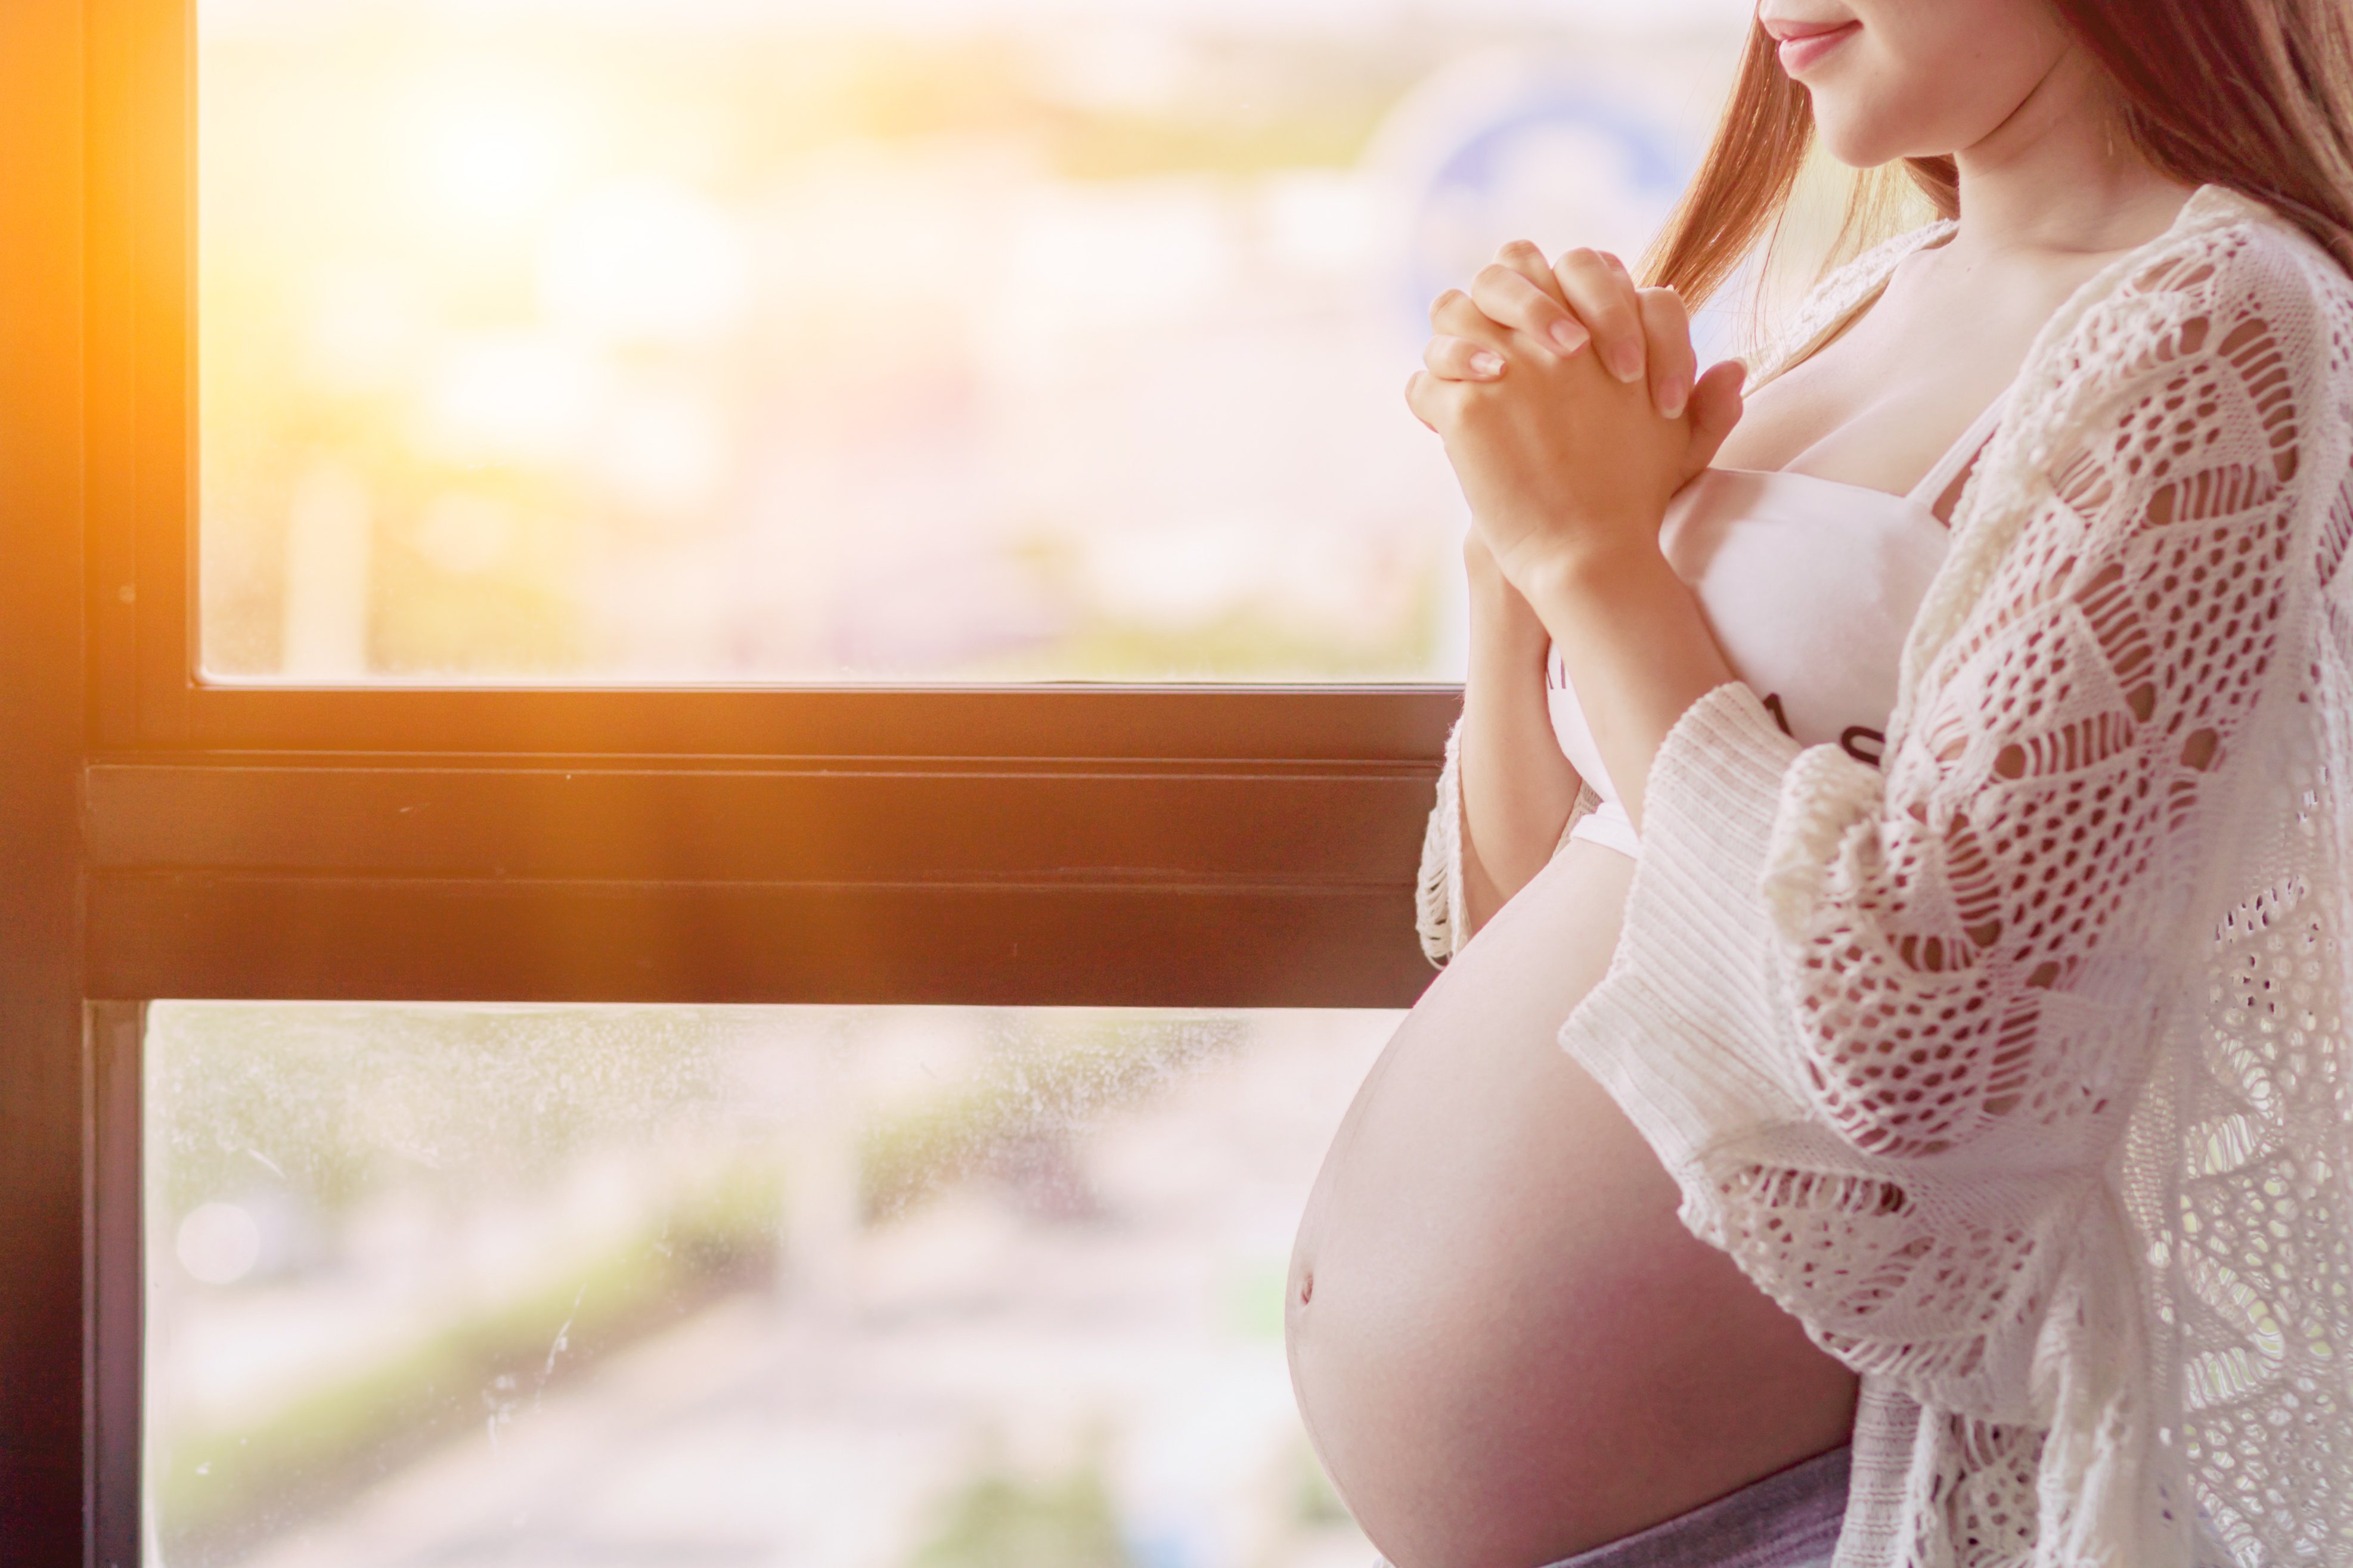 A Prayer For Pregnancy Through Every Stage of Creating Life